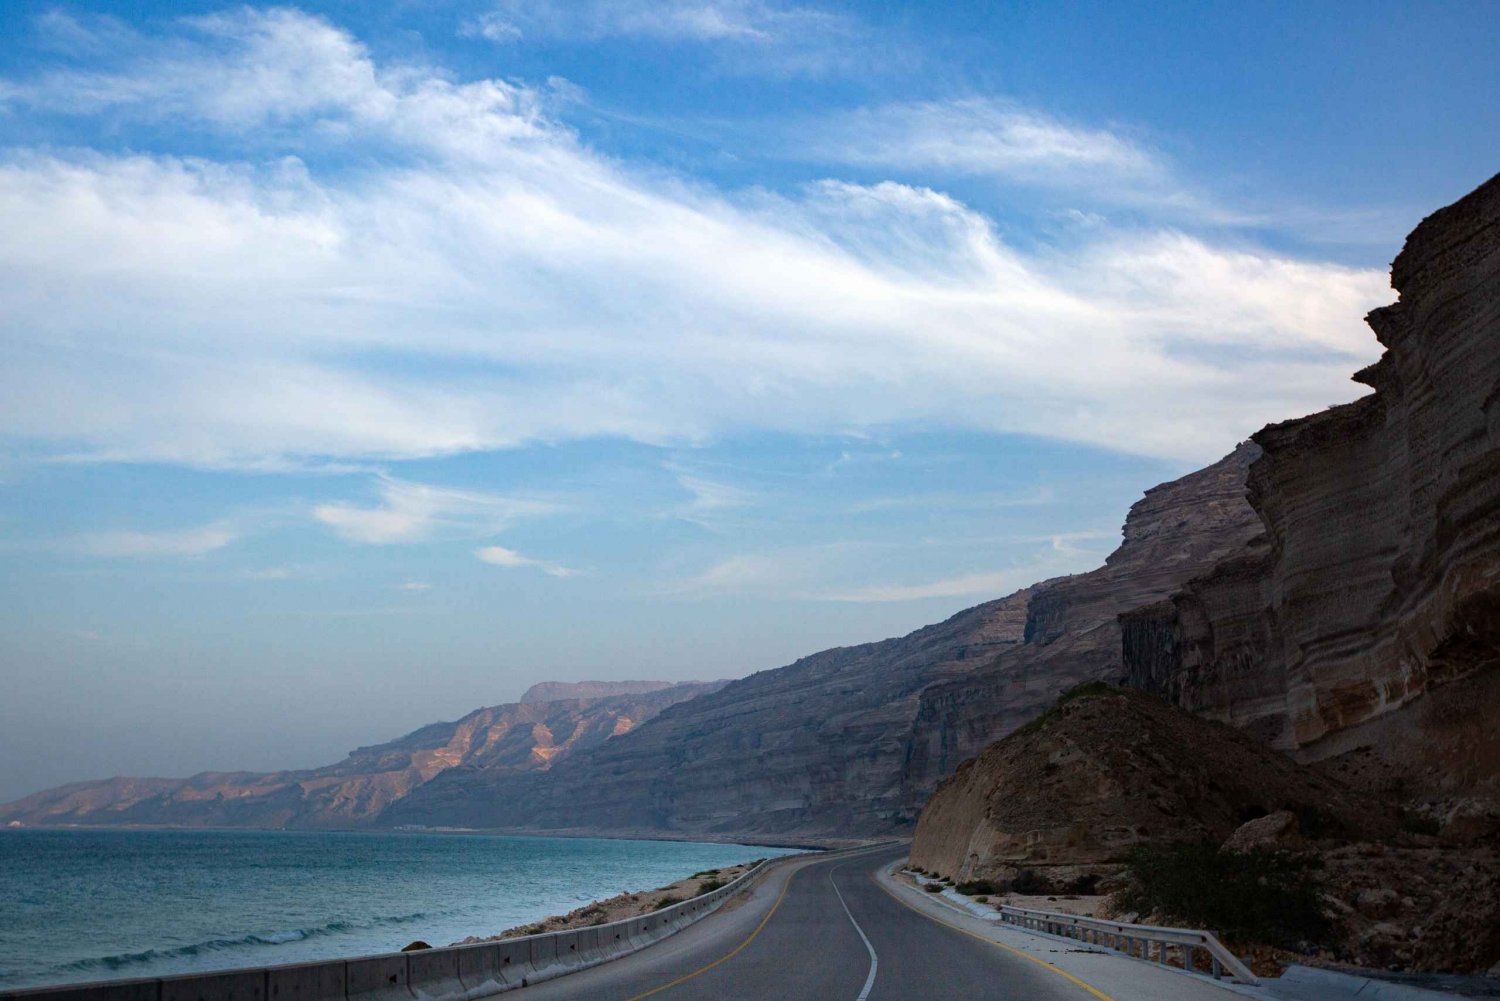 Salalah. An Active Day in the Oasis of the Middle East